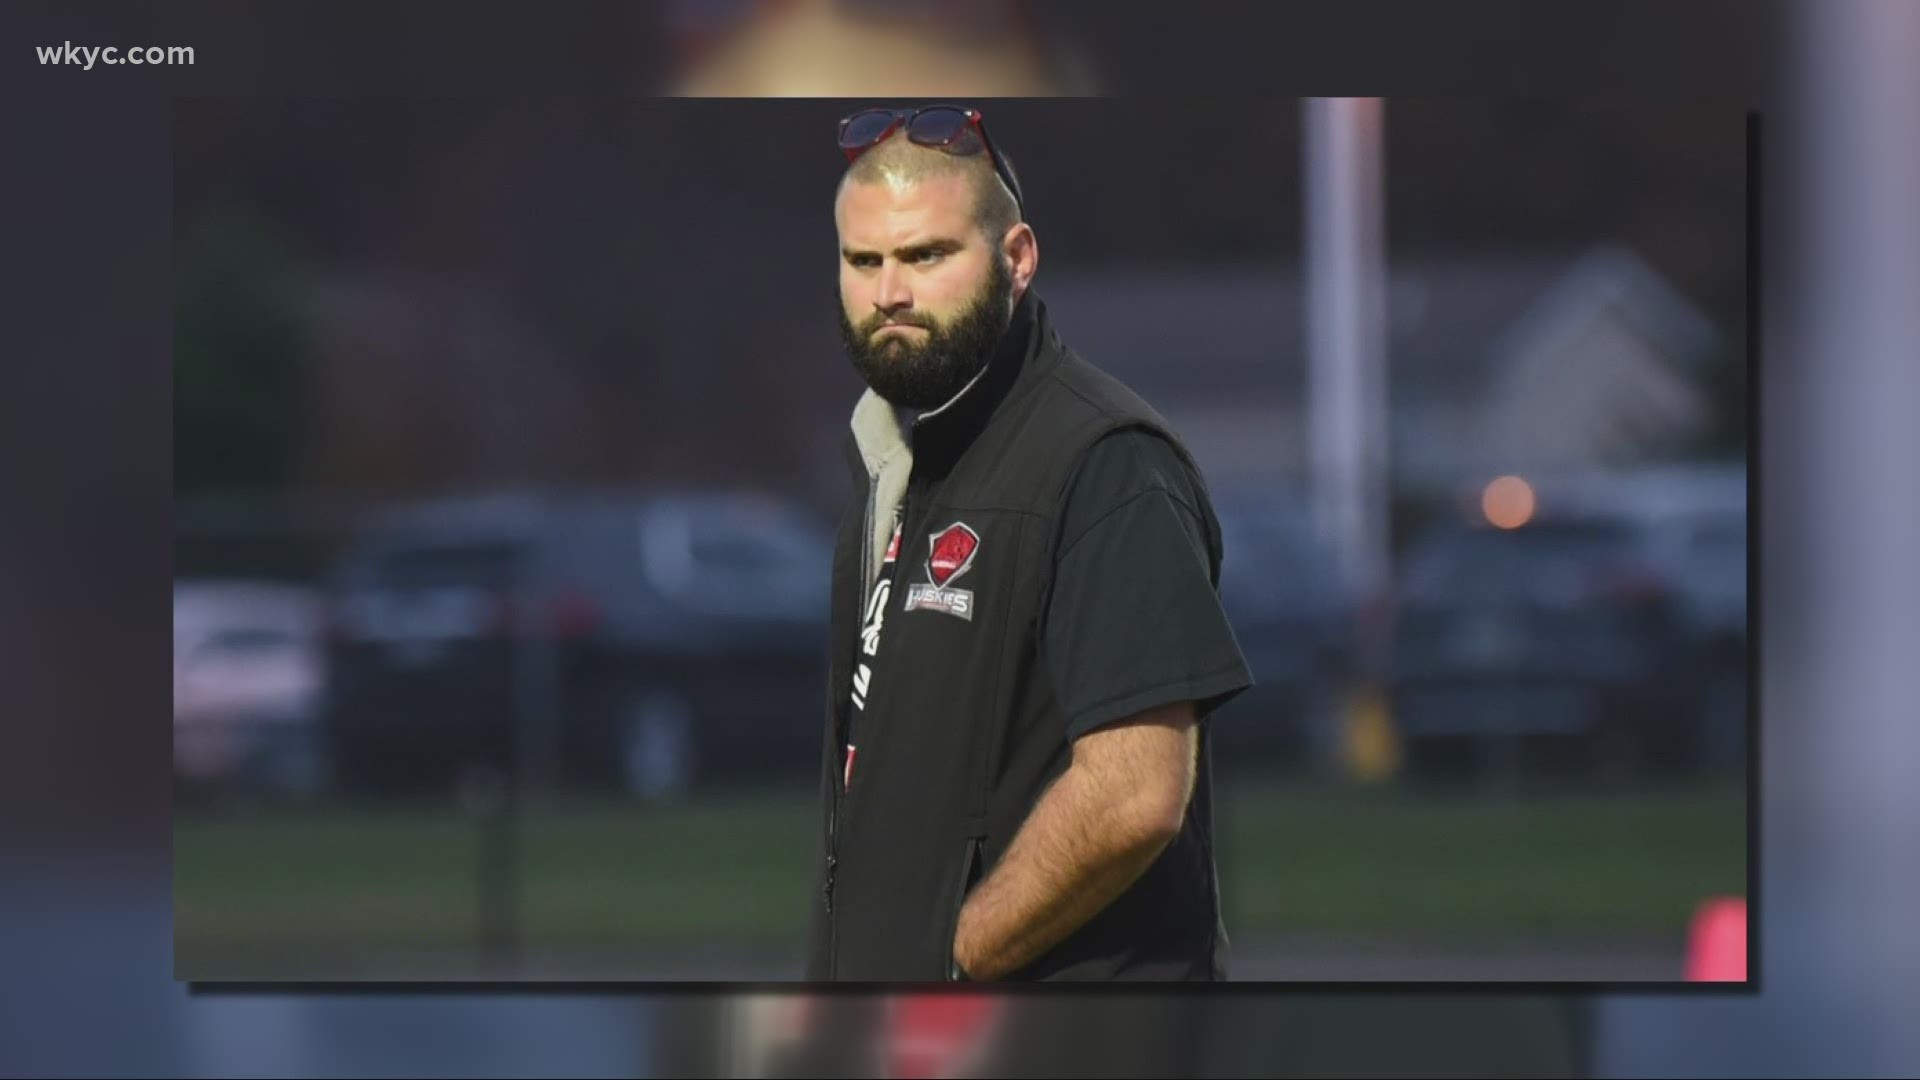 George Gresko, the head football coach of Middlefield's Cardinal HS, is charged with tampering with records and unauthorized use of a telecommunication device.